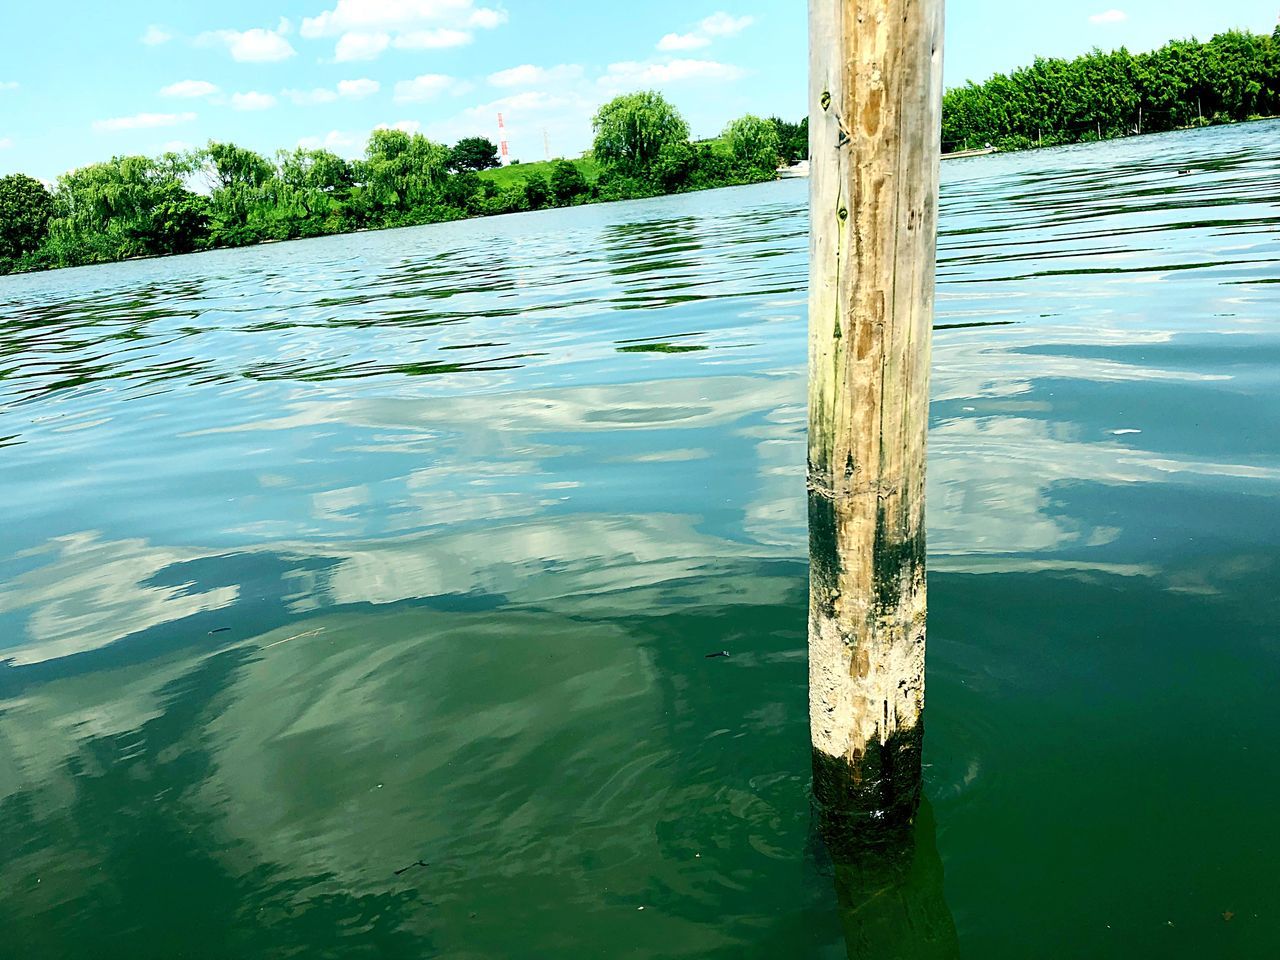 water, tree, plant, day, nature, no people, wood - material, waterfront, tranquility, outdoors, scenics - nature, beauty in nature, lake, green color, sky, reflection, tranquil scene, cloud - sky, post, wooden post, turquoise colored